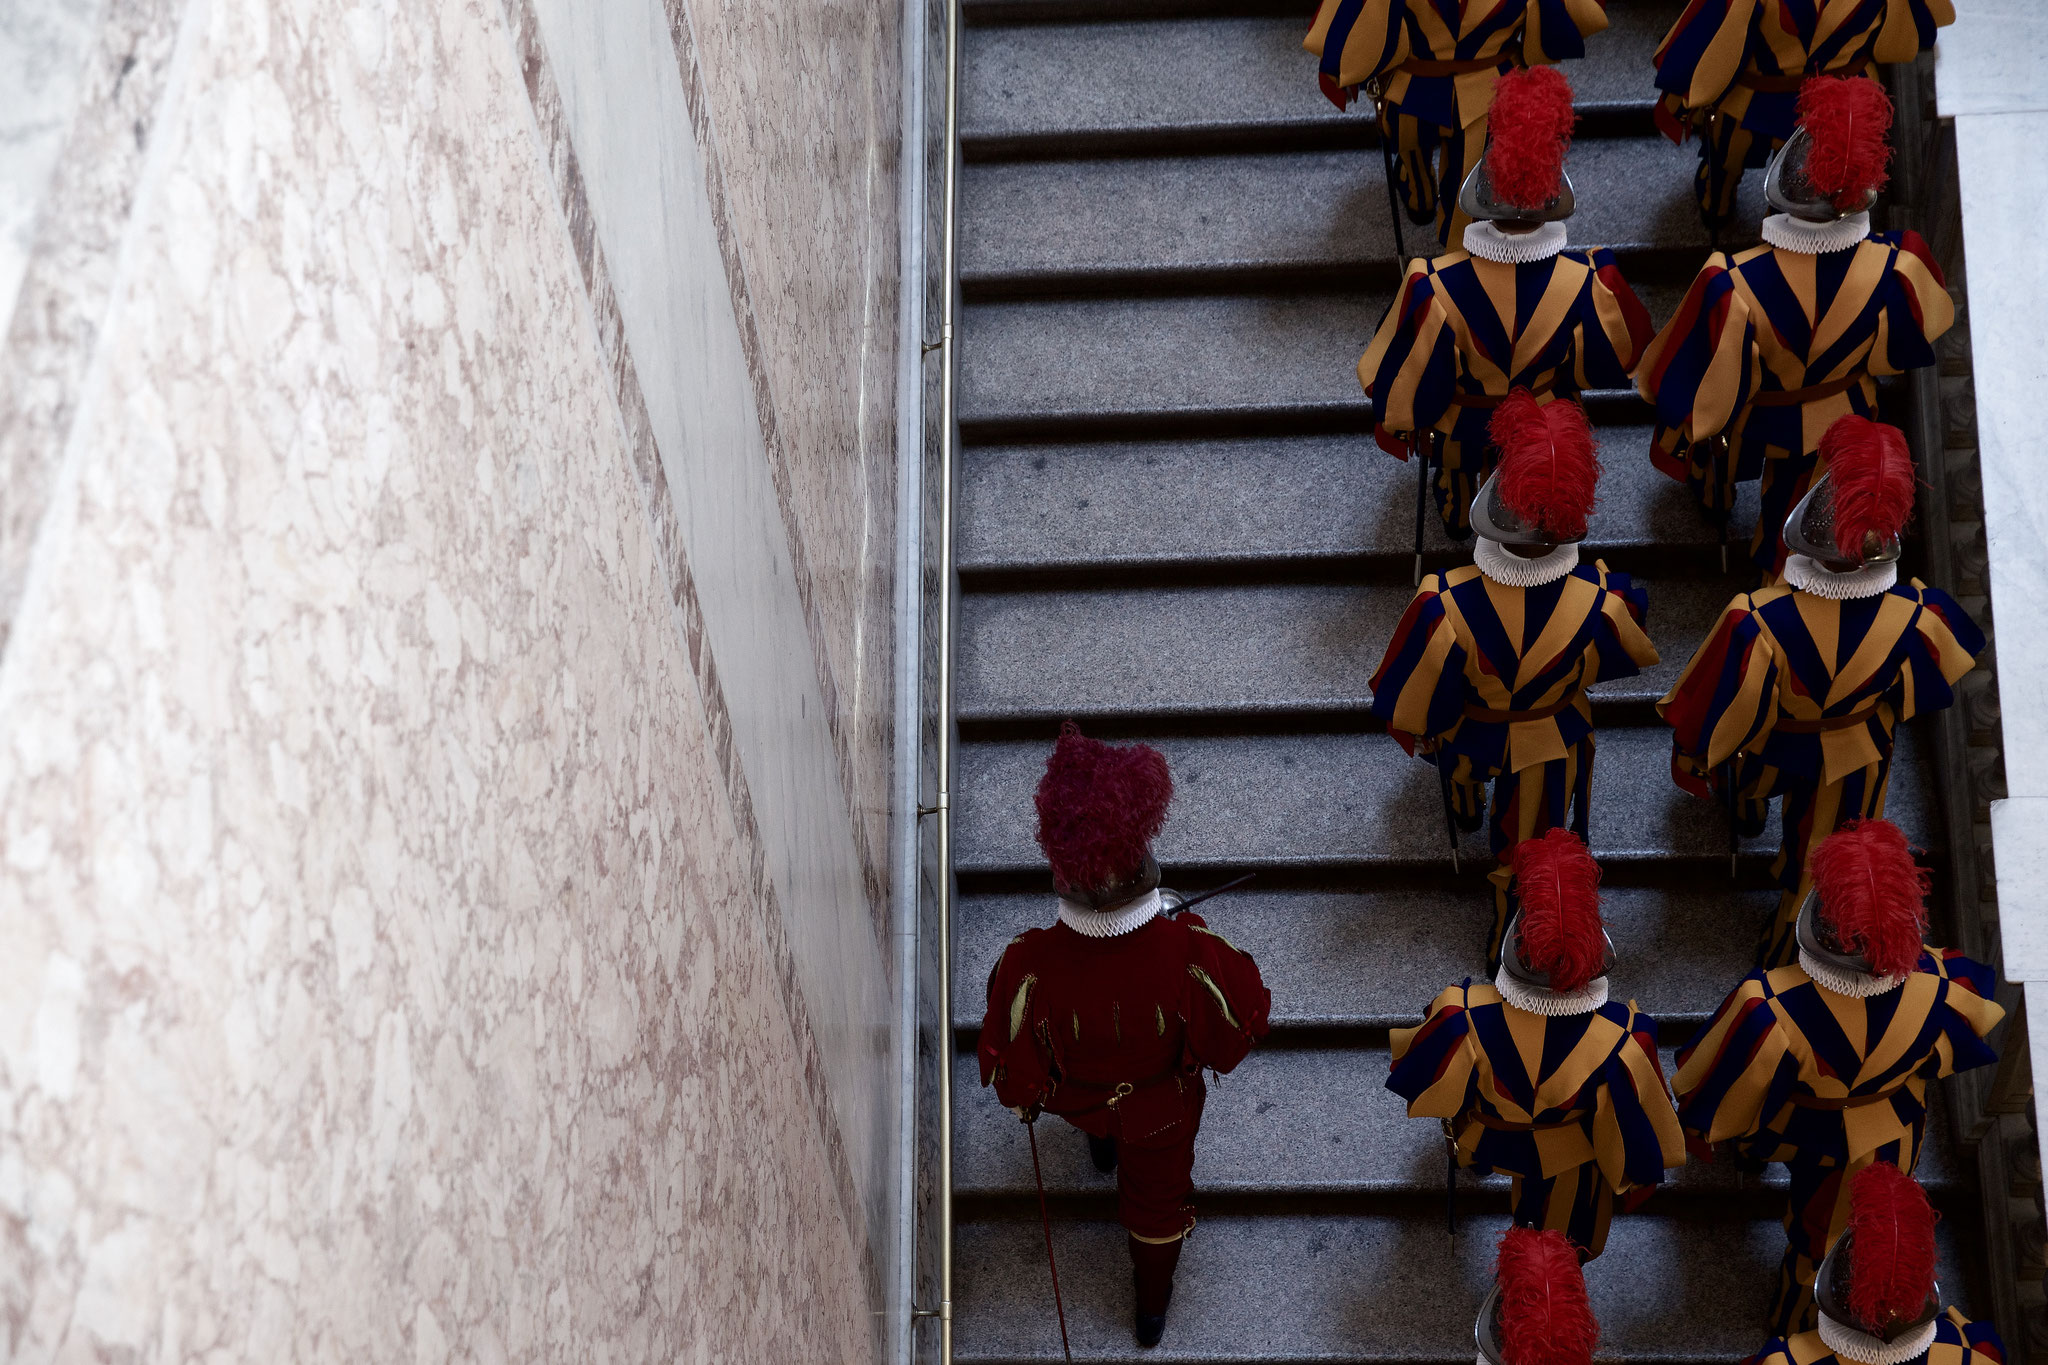 Marching stairs inside the Papal Palace.